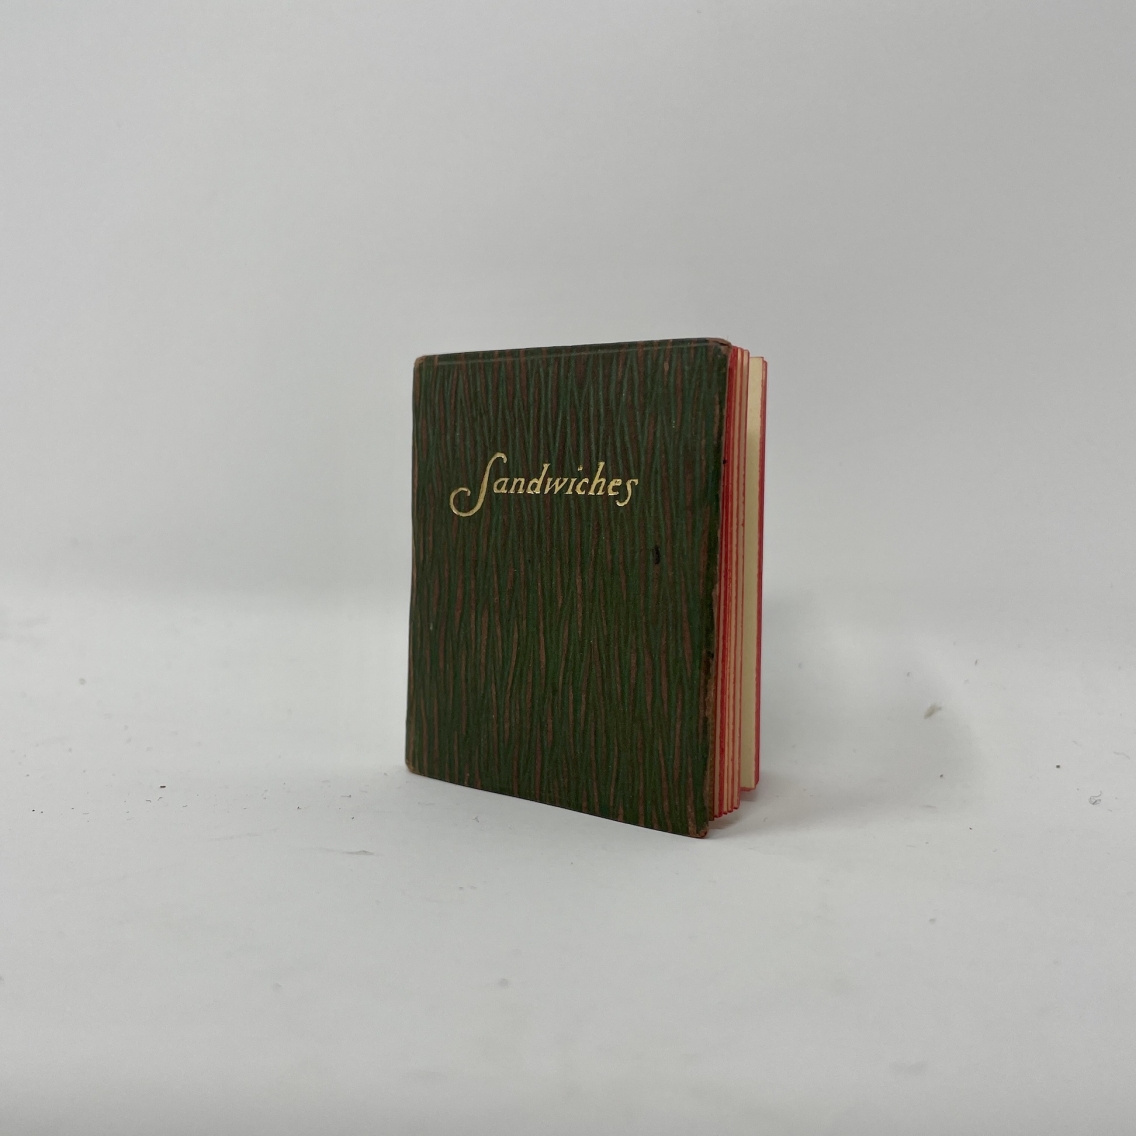 tiny book with "sandwiches" in gold lettering on cover